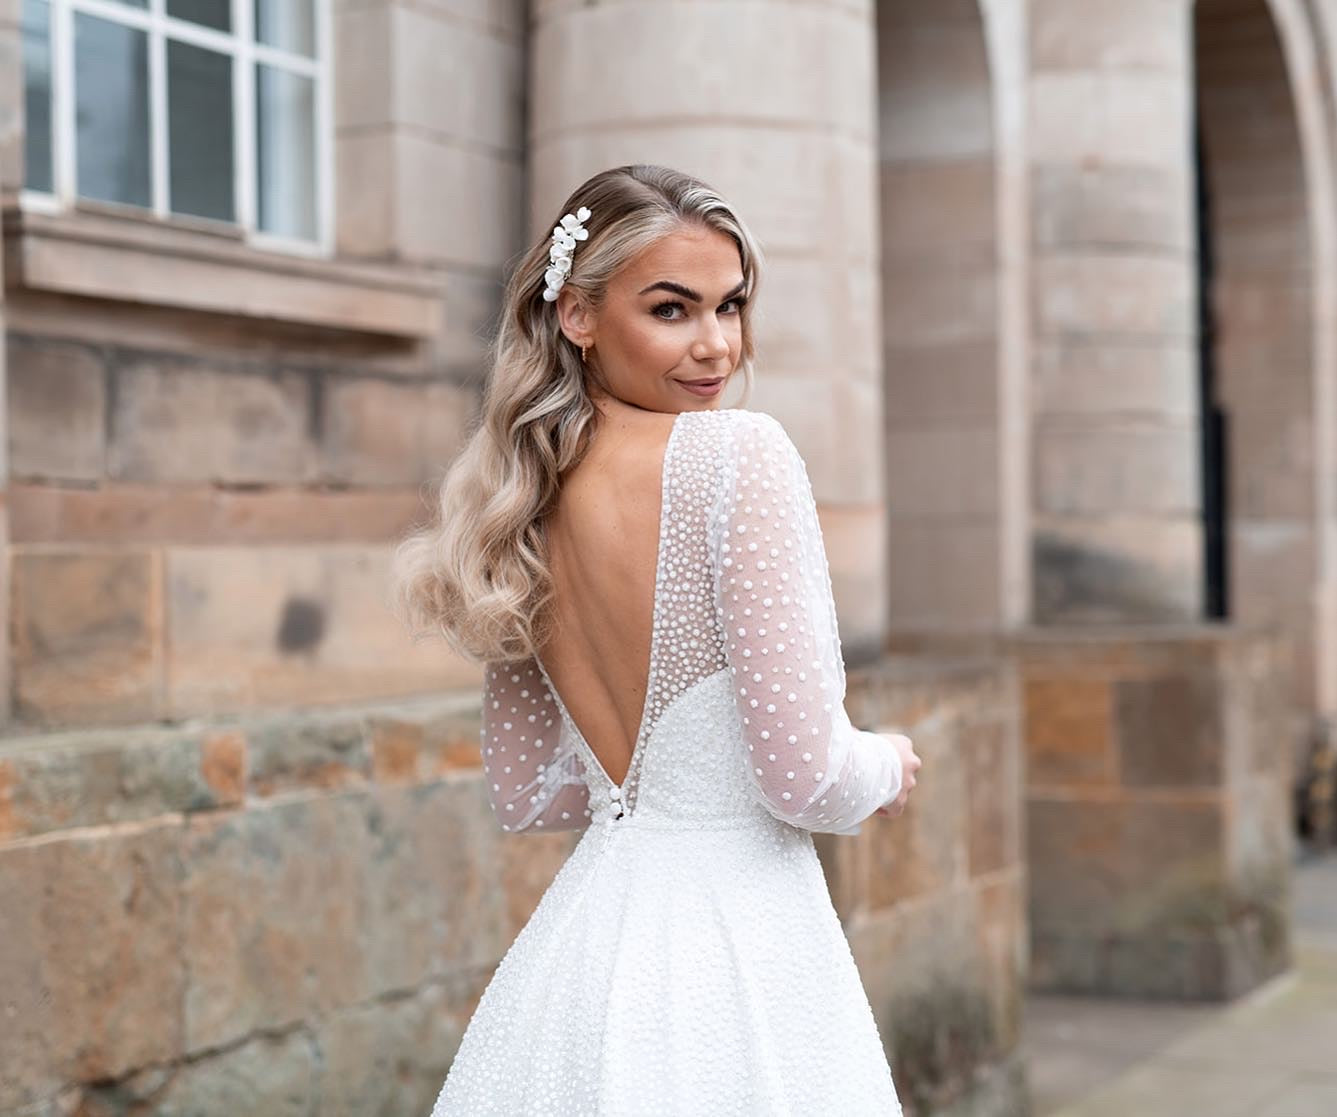 Blonde bridal model in front of historic building while looking over her shoulder while wearing Devoted bridal hair accessories positioned on right hand side of styled hair.